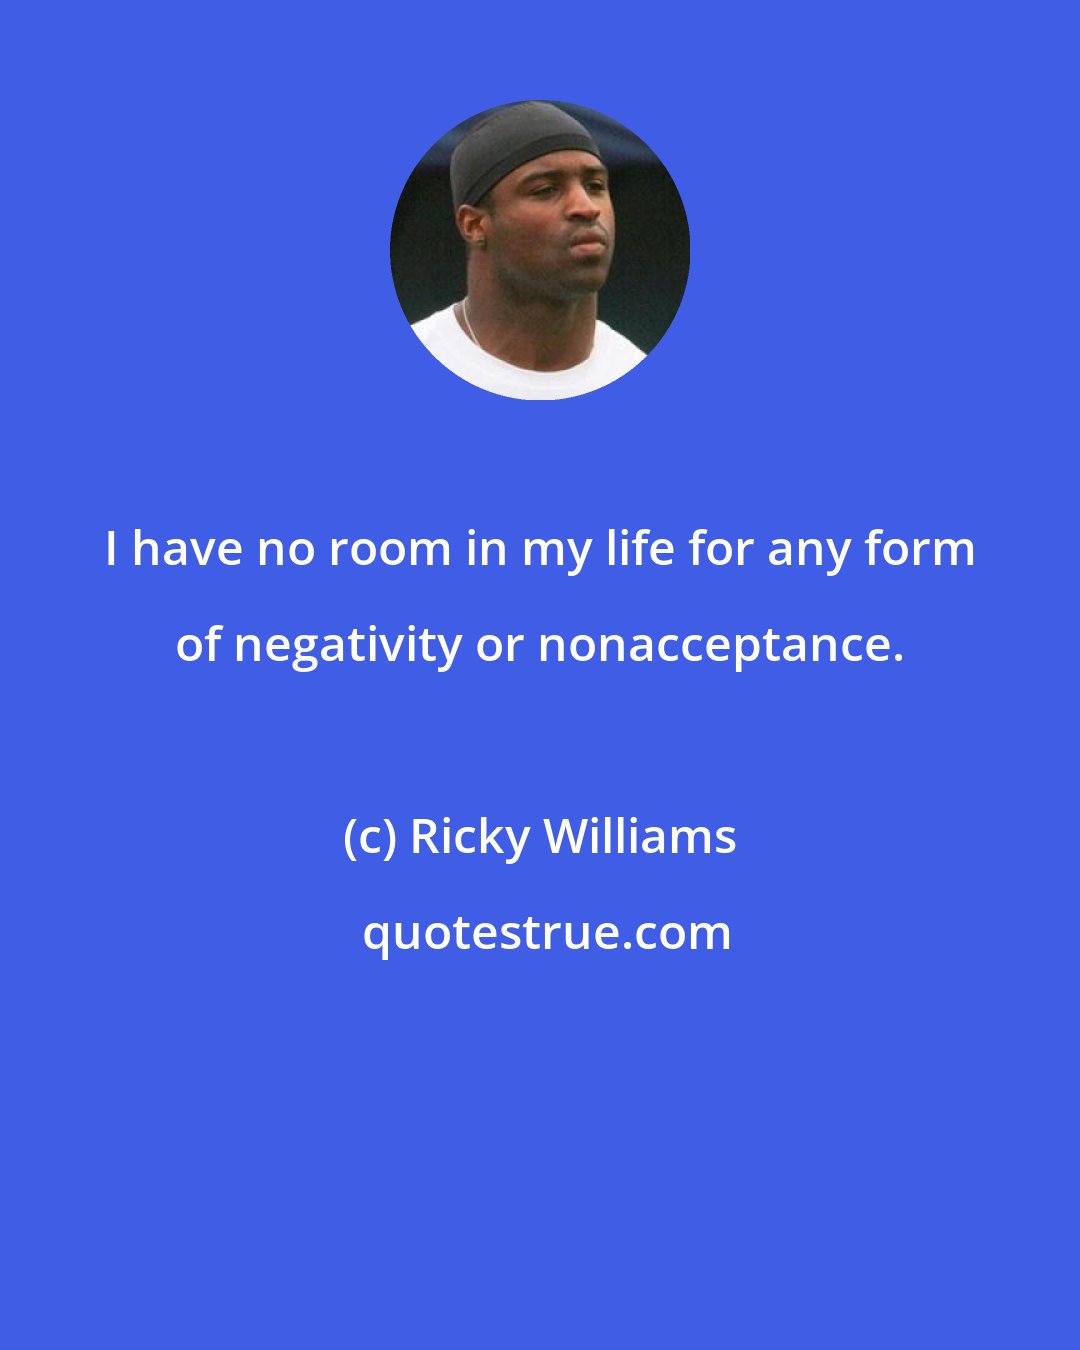 Ricky Williams: I have no room in my life for any form of negativity or nonacceptance.